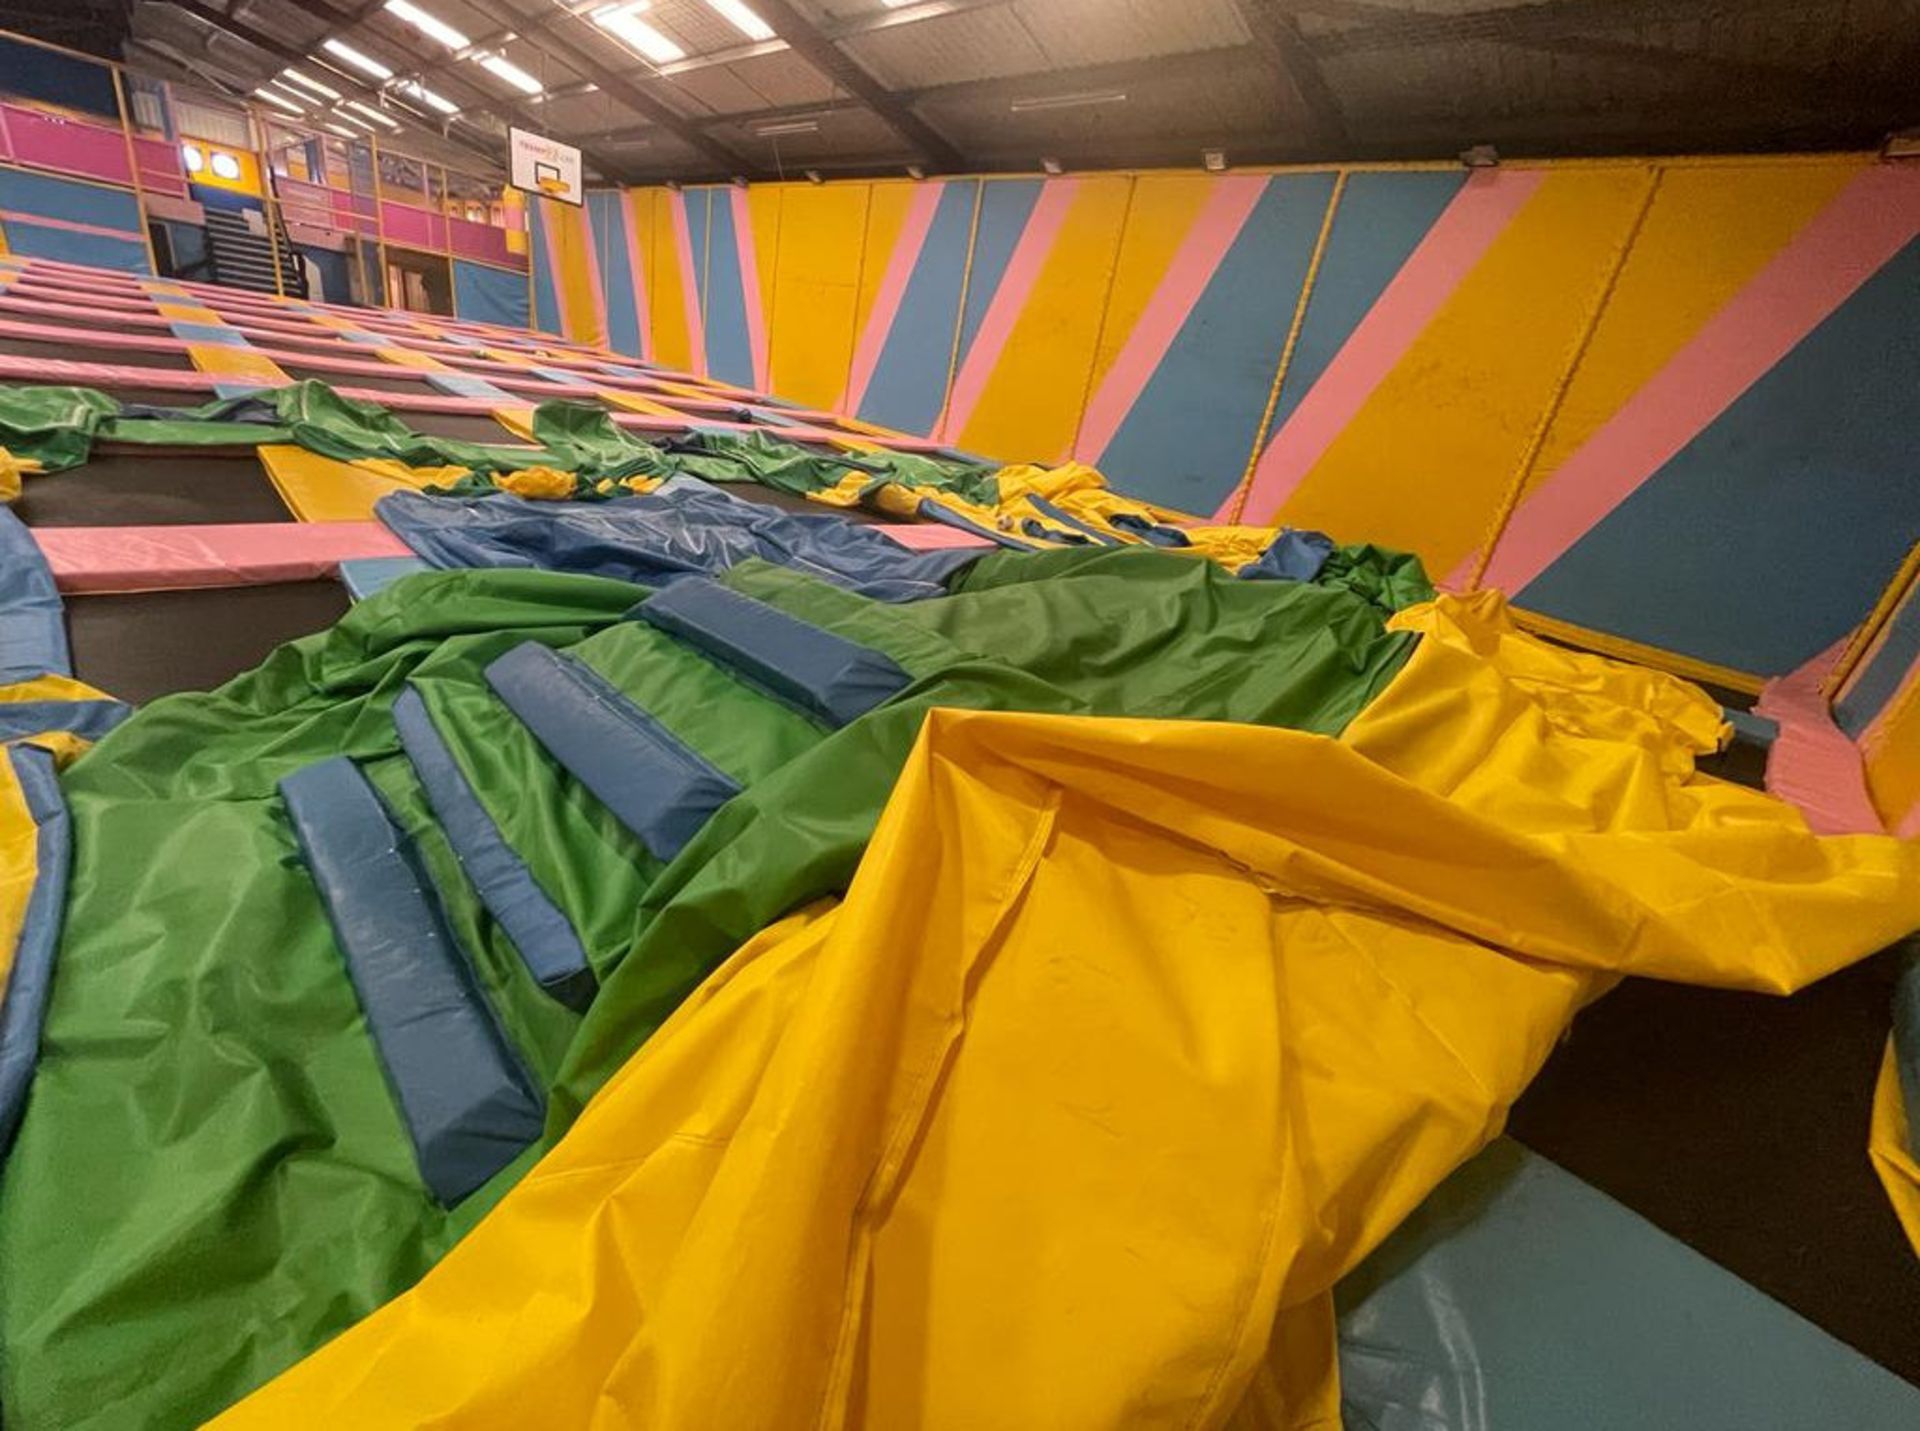 1 x Trampoline Park With Over 40 Interconnected Trampolines, Inflatable Activity Area, Waiting - Image 22 of 99